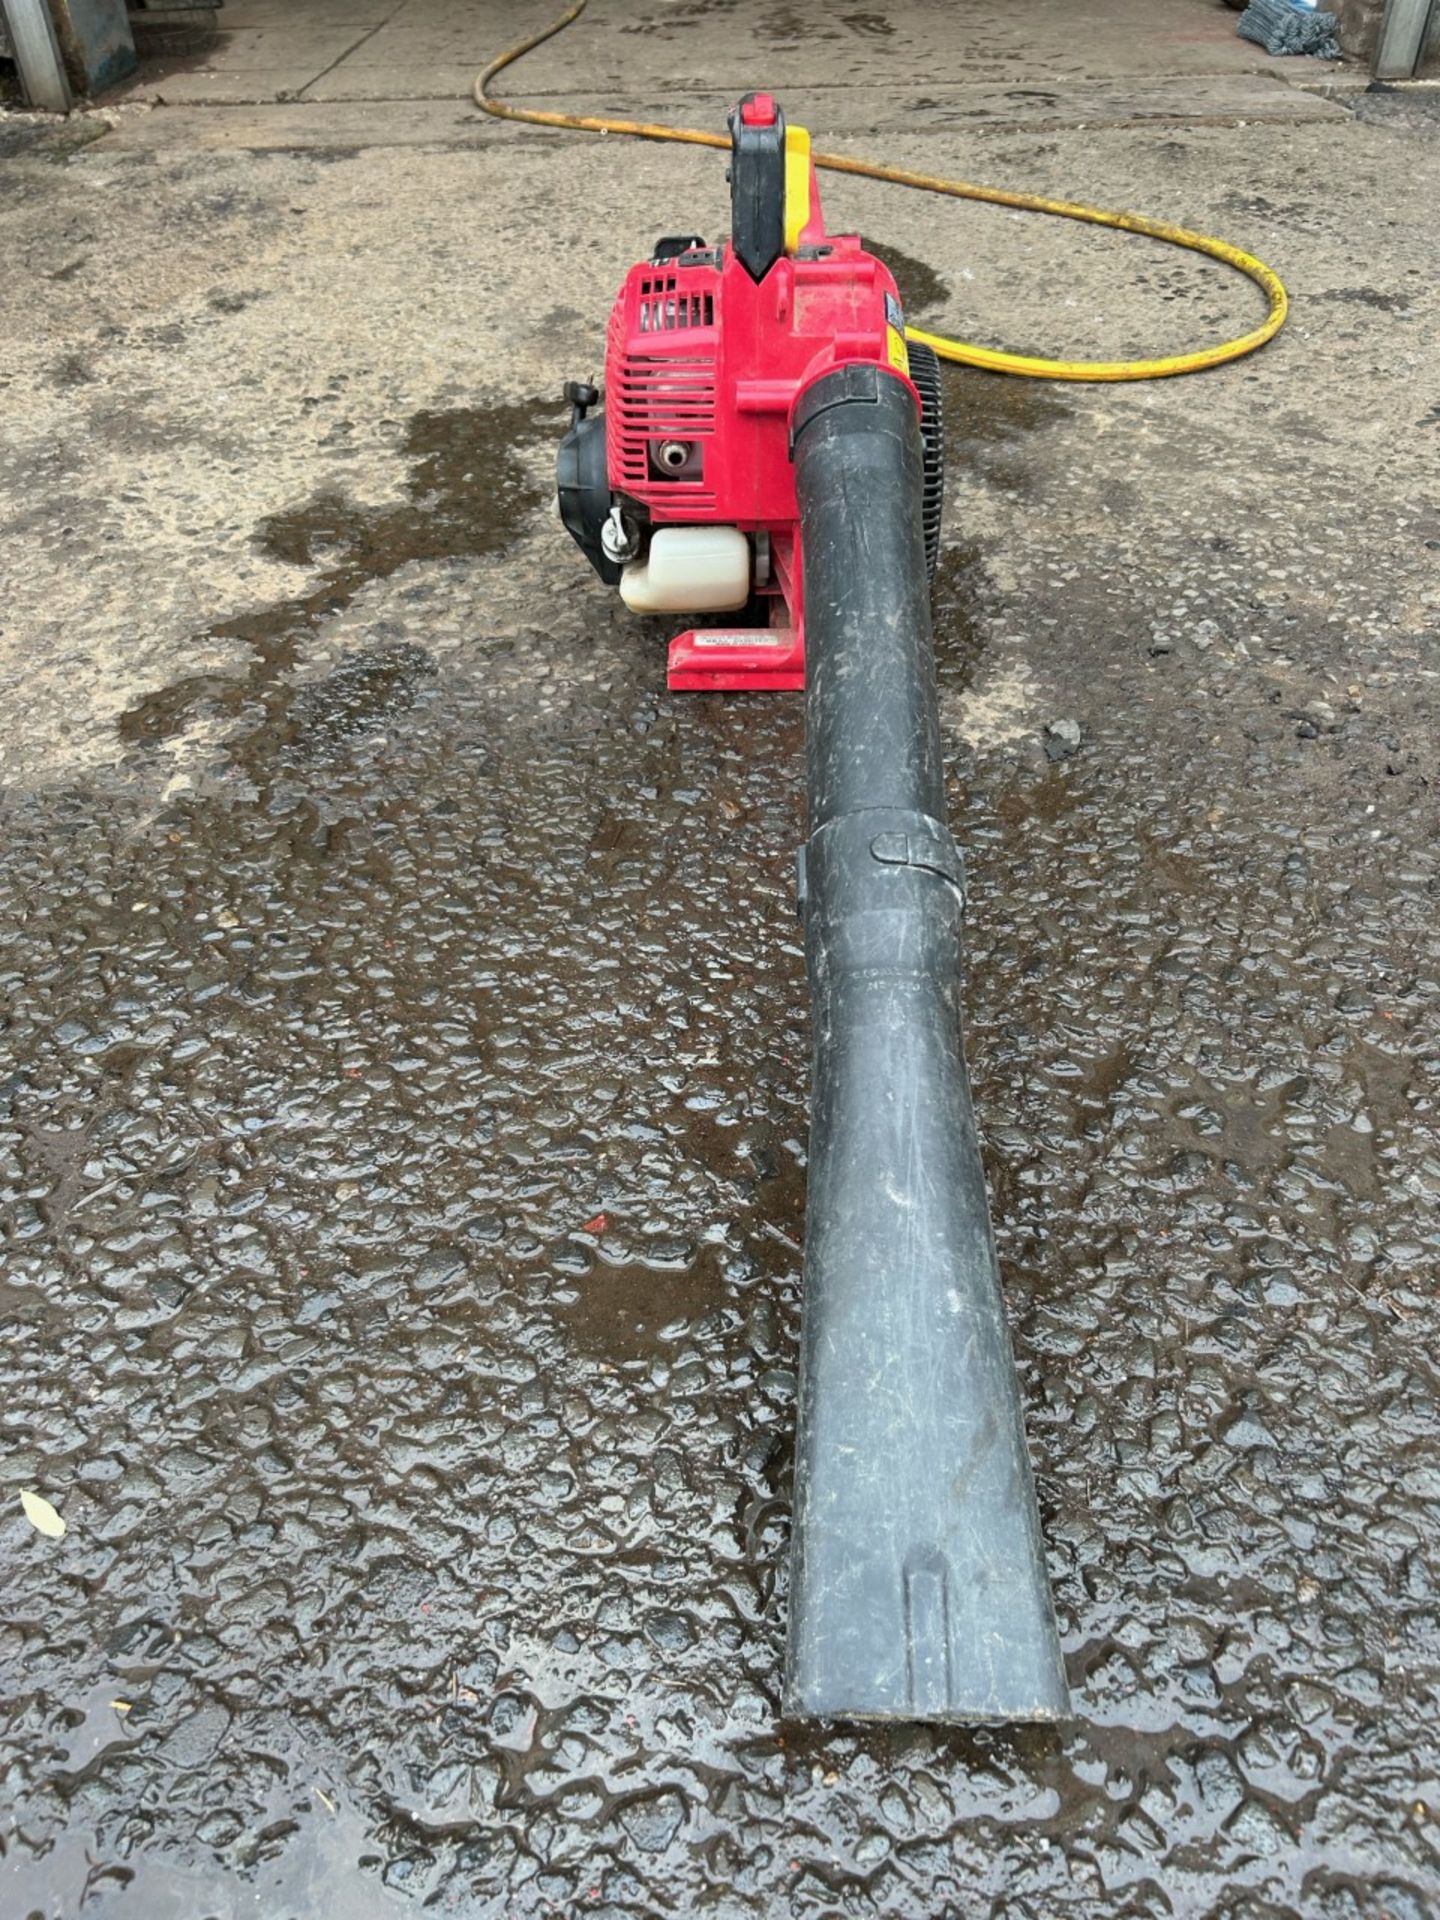 Honda HHB25 4 stroke easy start leaf blower. Good condition, full working order as seen in video - Image 4 of 4